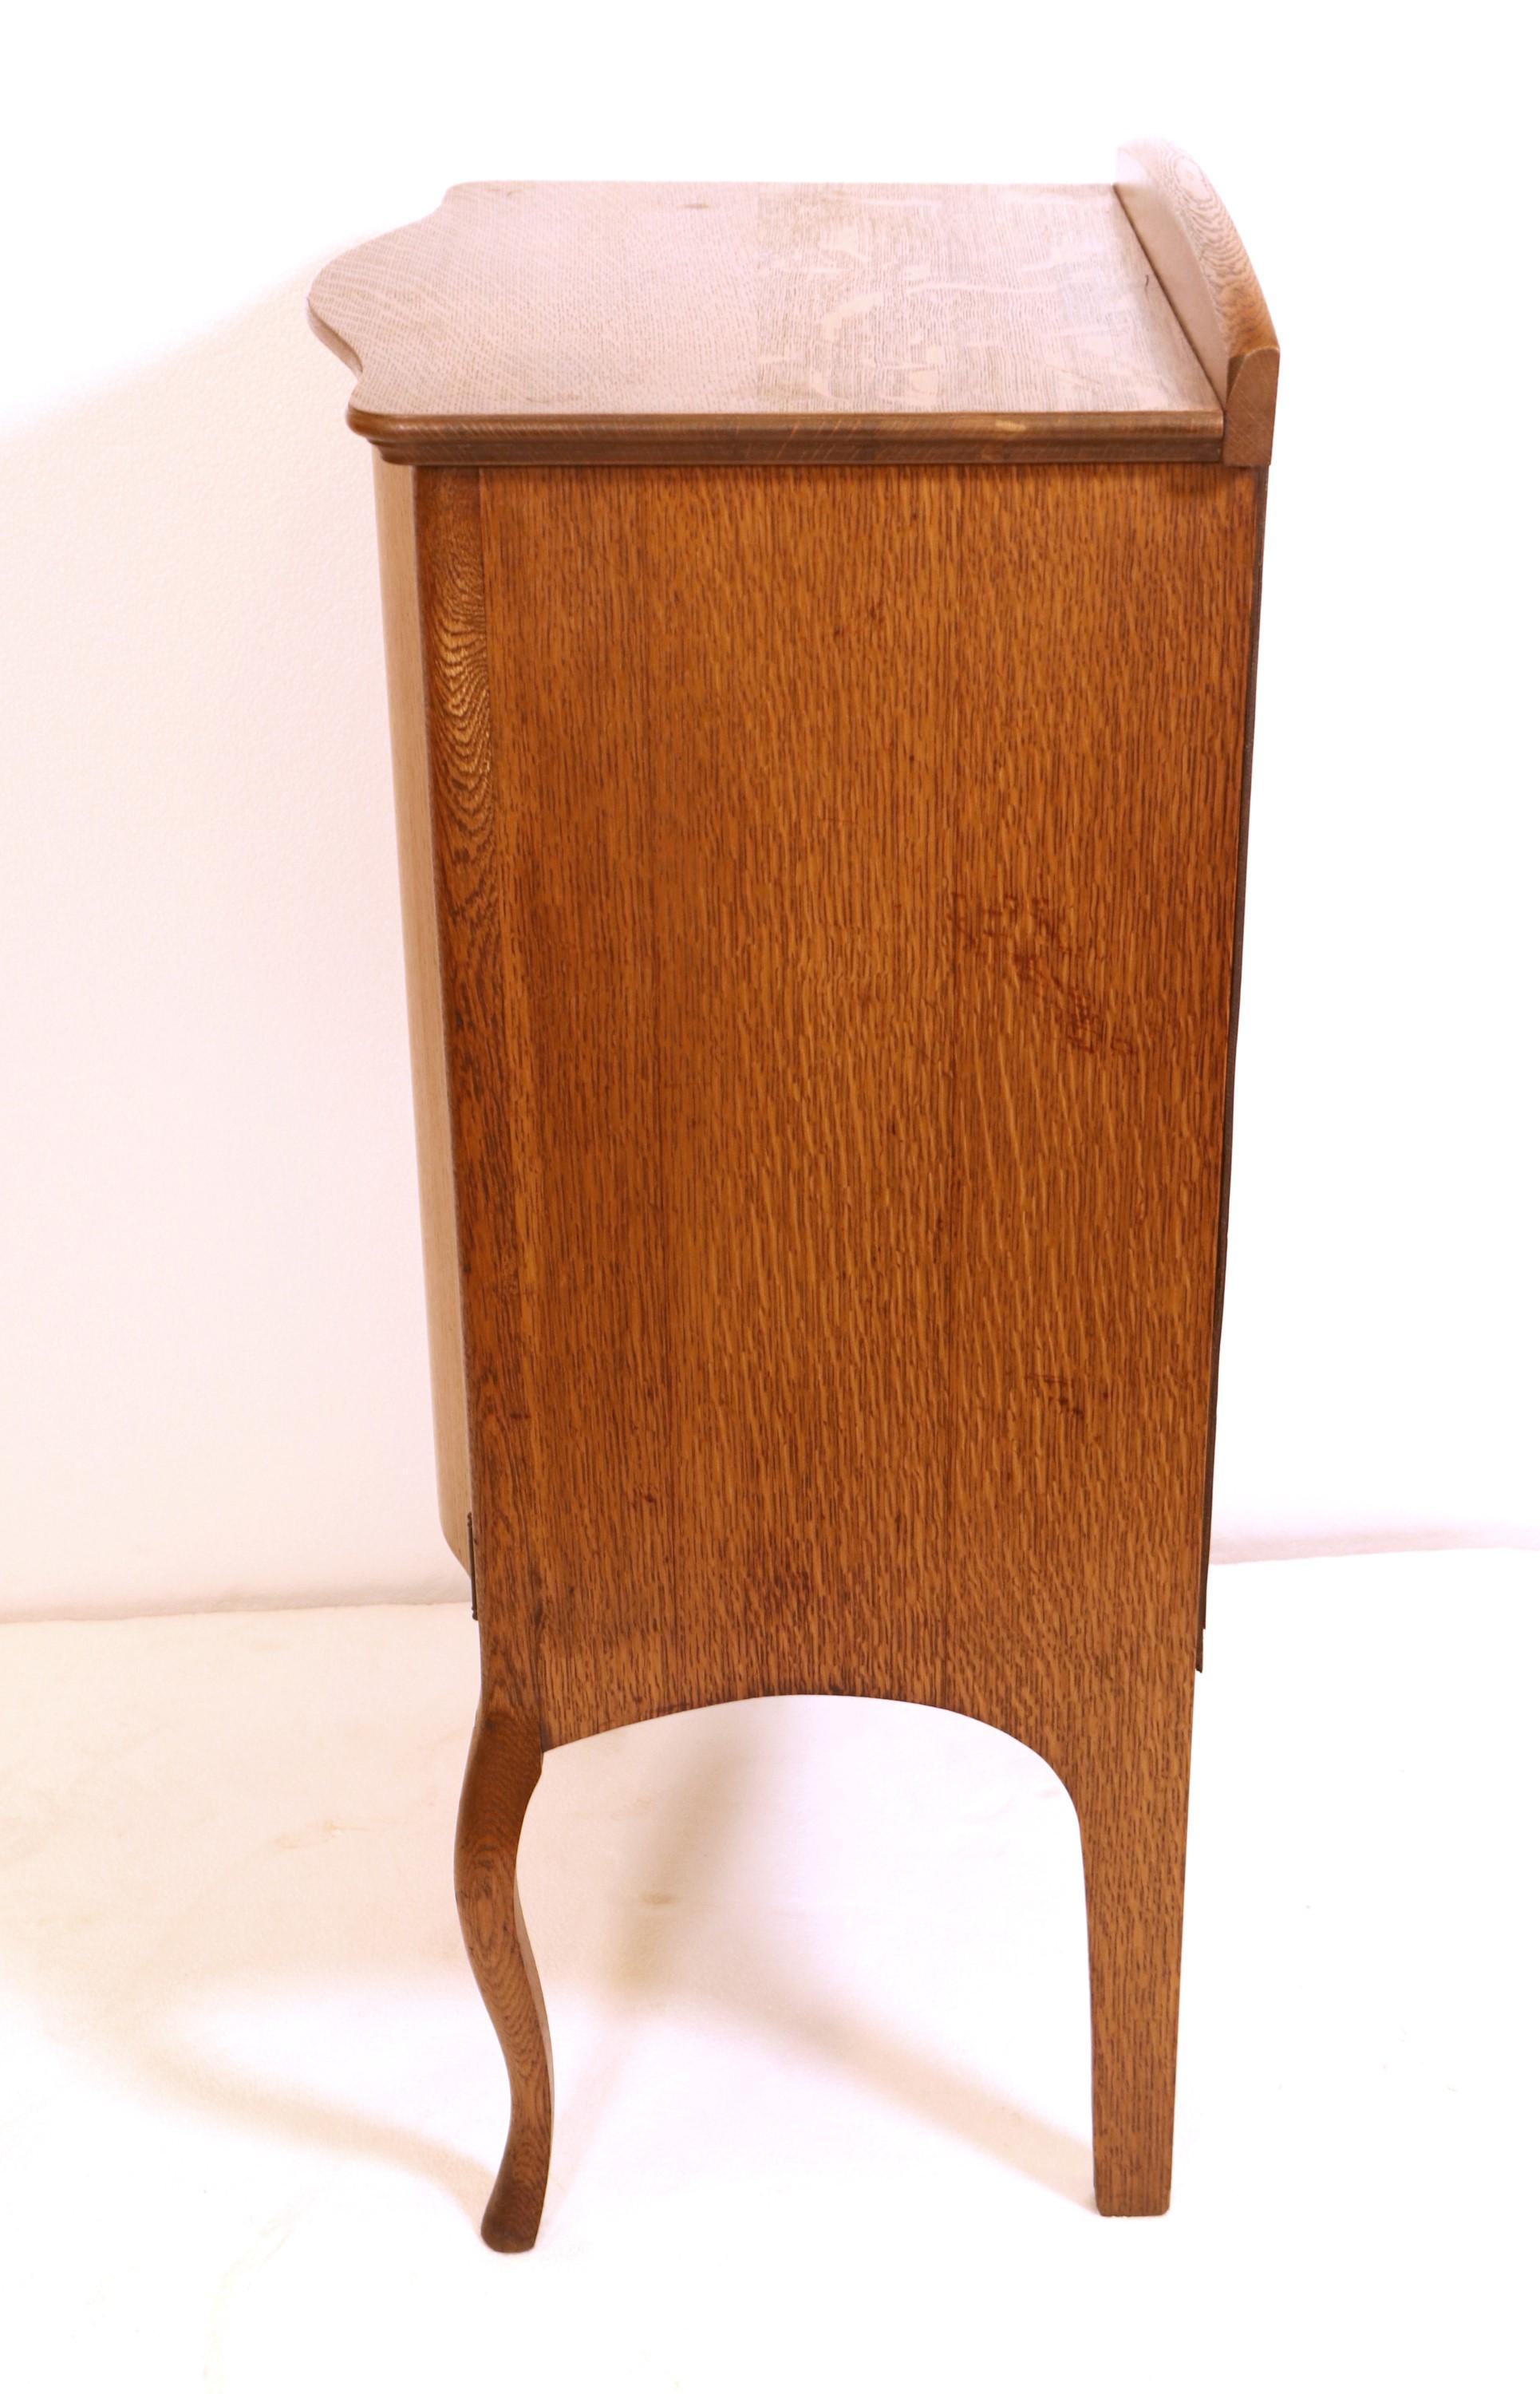 Edwardian Curved Oak Sheet Music Cabinet with Cabriole Legs